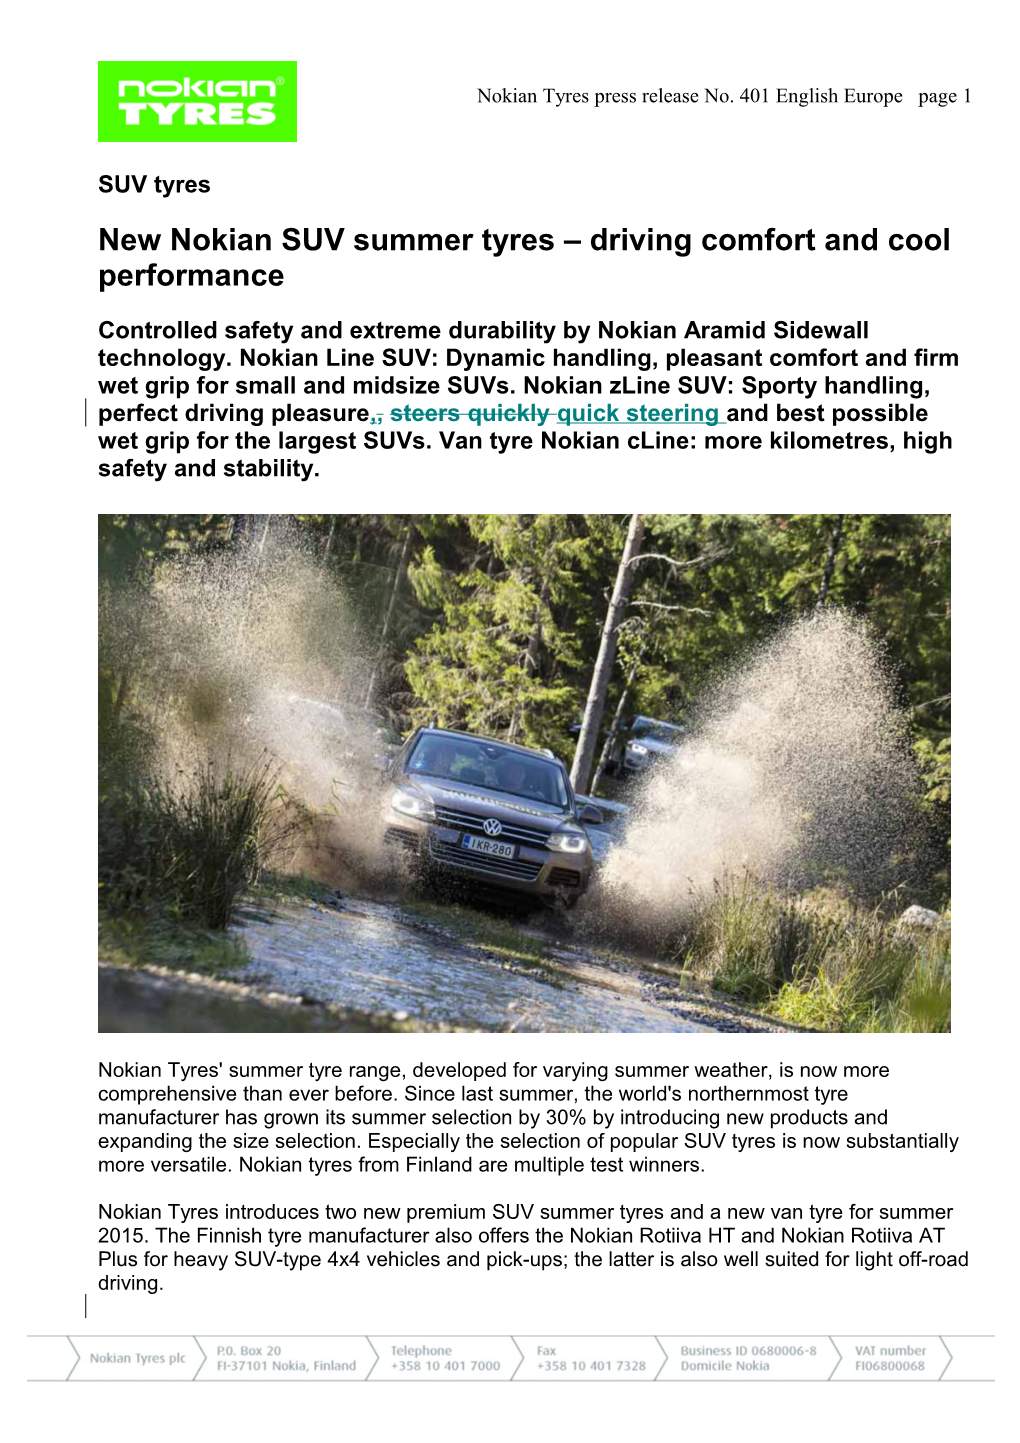 New Nokian SUV Summer Tyres Driving Comfort and Cool Performance